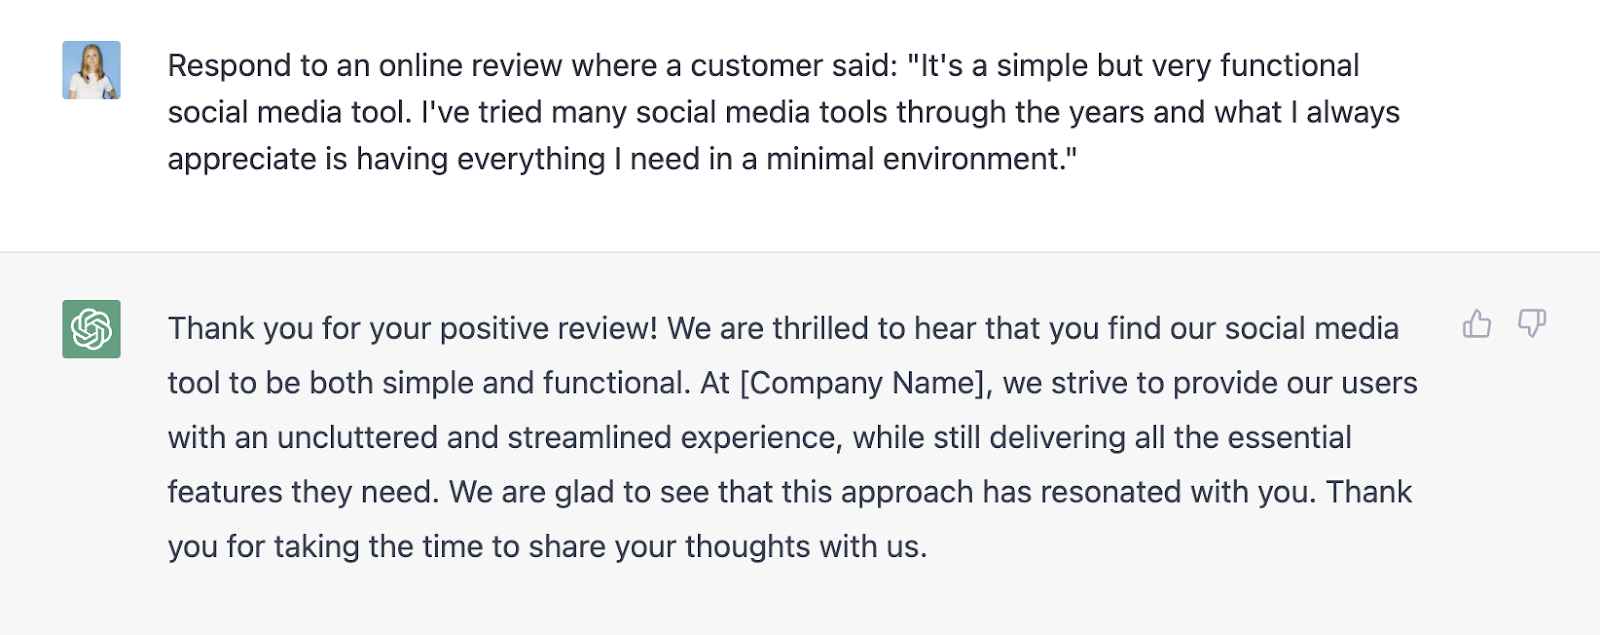 chatgpt generated response for positive customer review